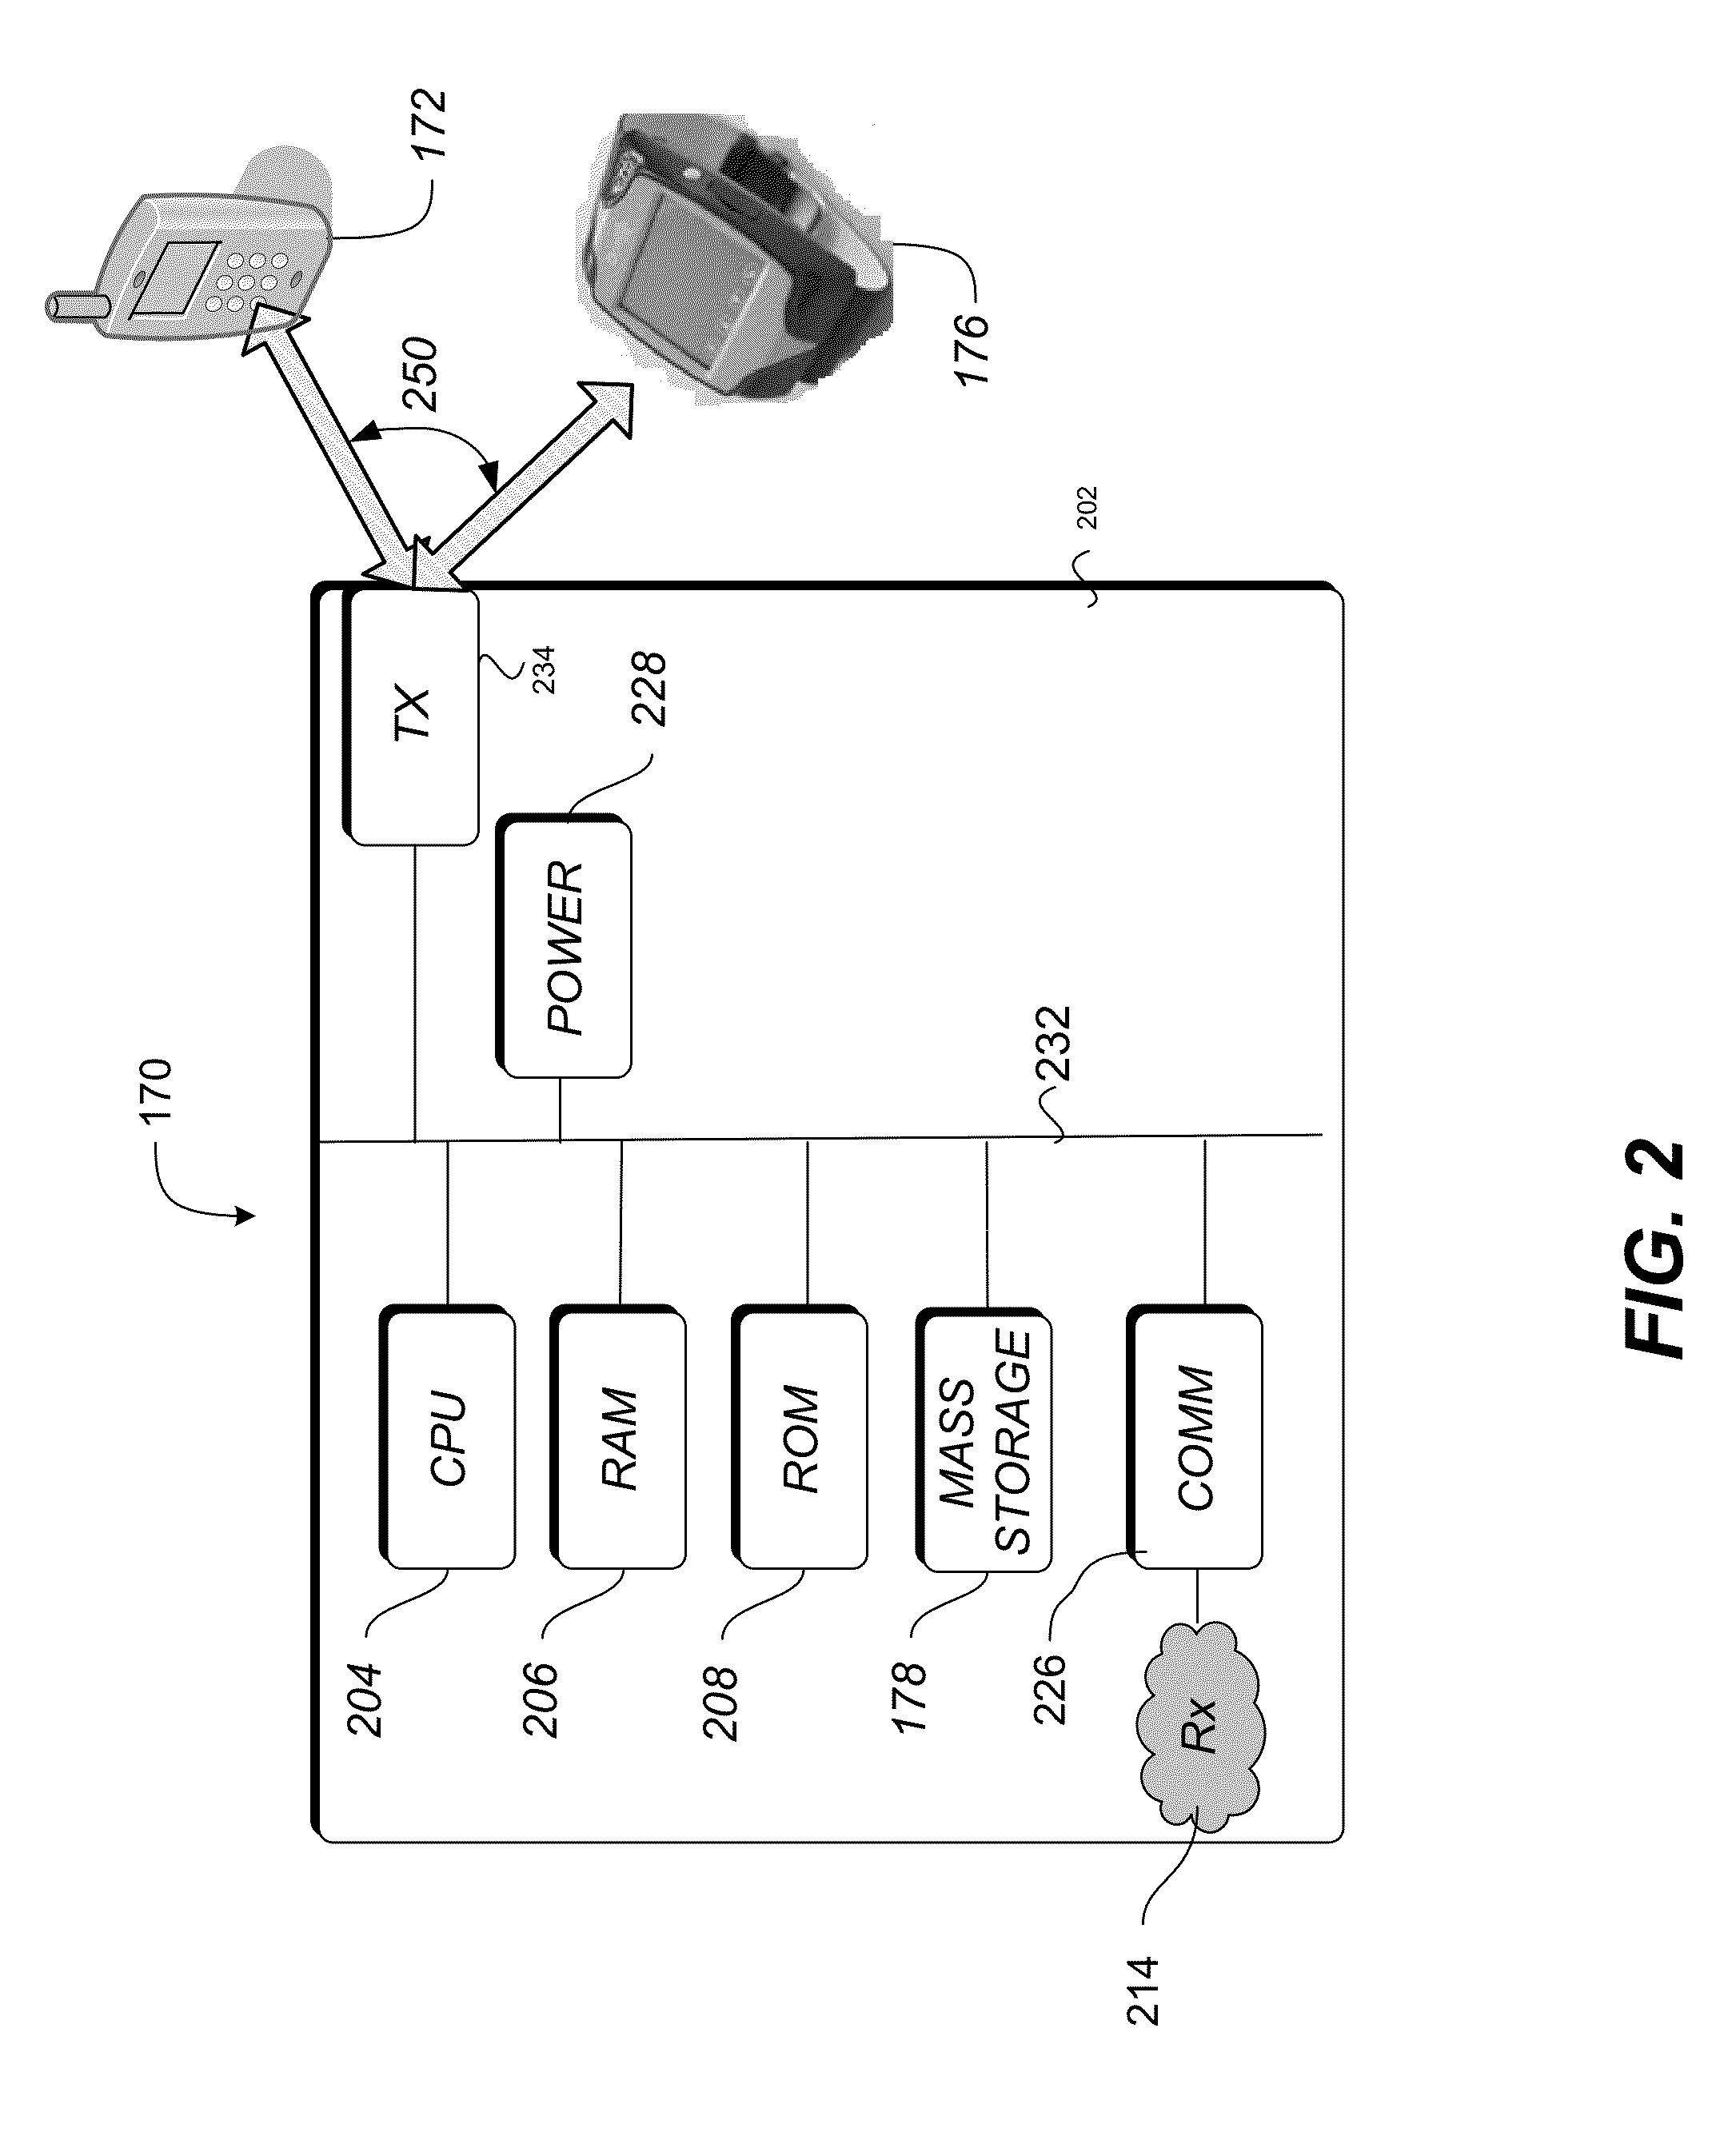 System and methods for rebroadcasting of radio ads over other mediums